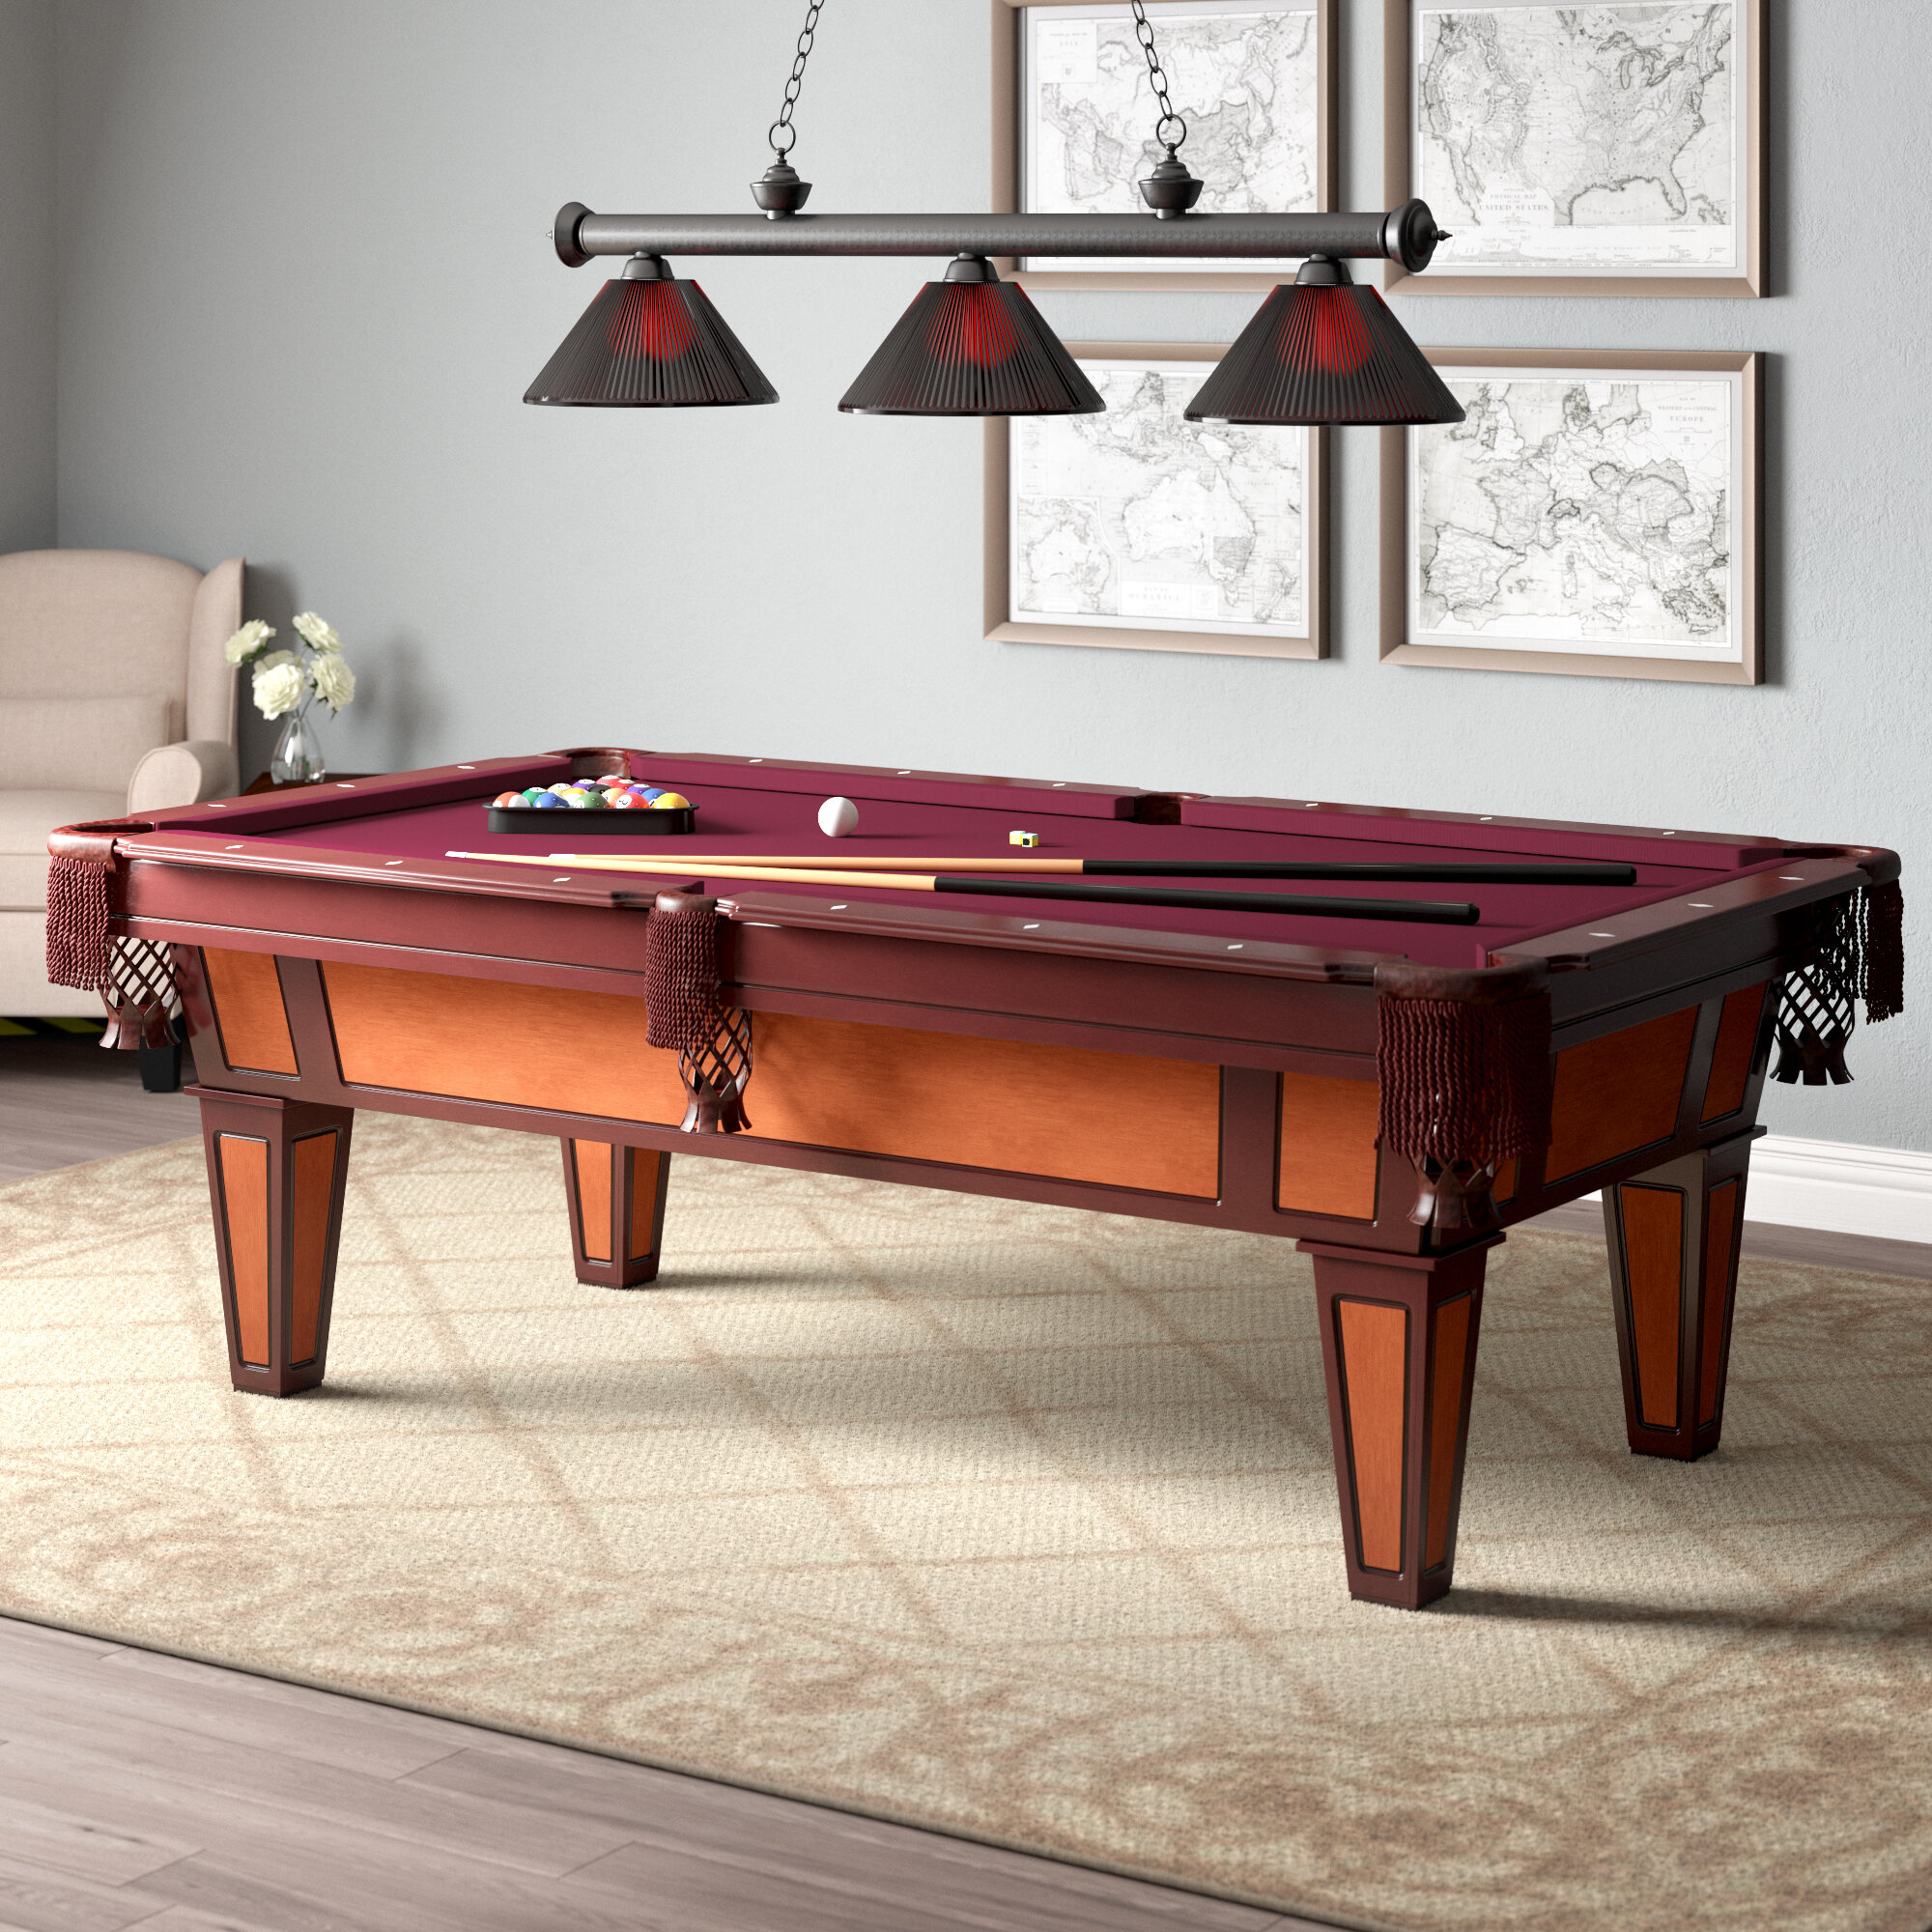 Gld Products Fat Cat Reno Billiards Table With Accessories